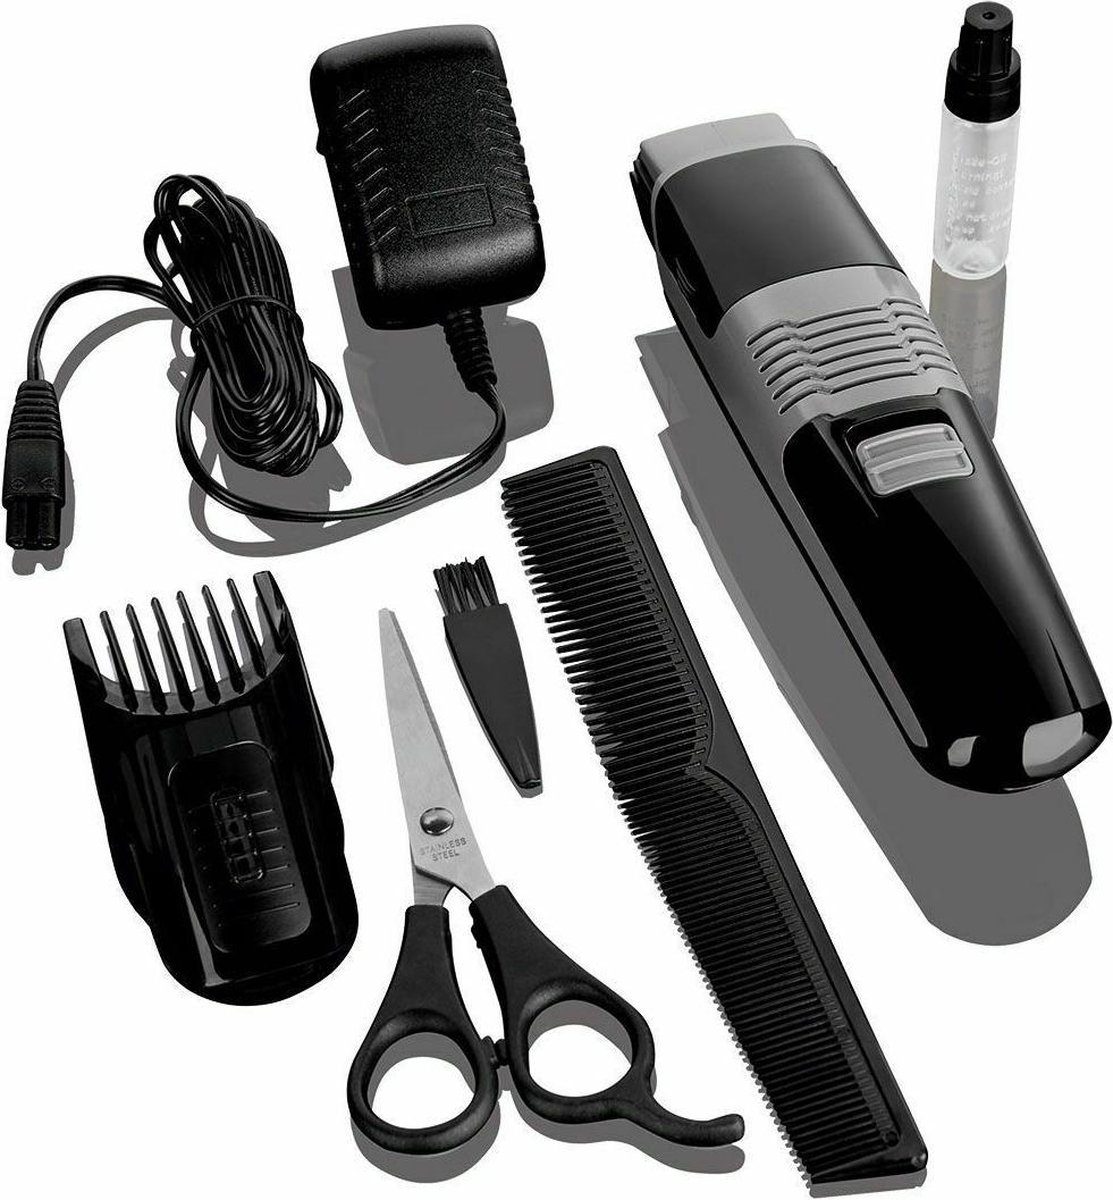 silvercrest hair and beard trimmer review